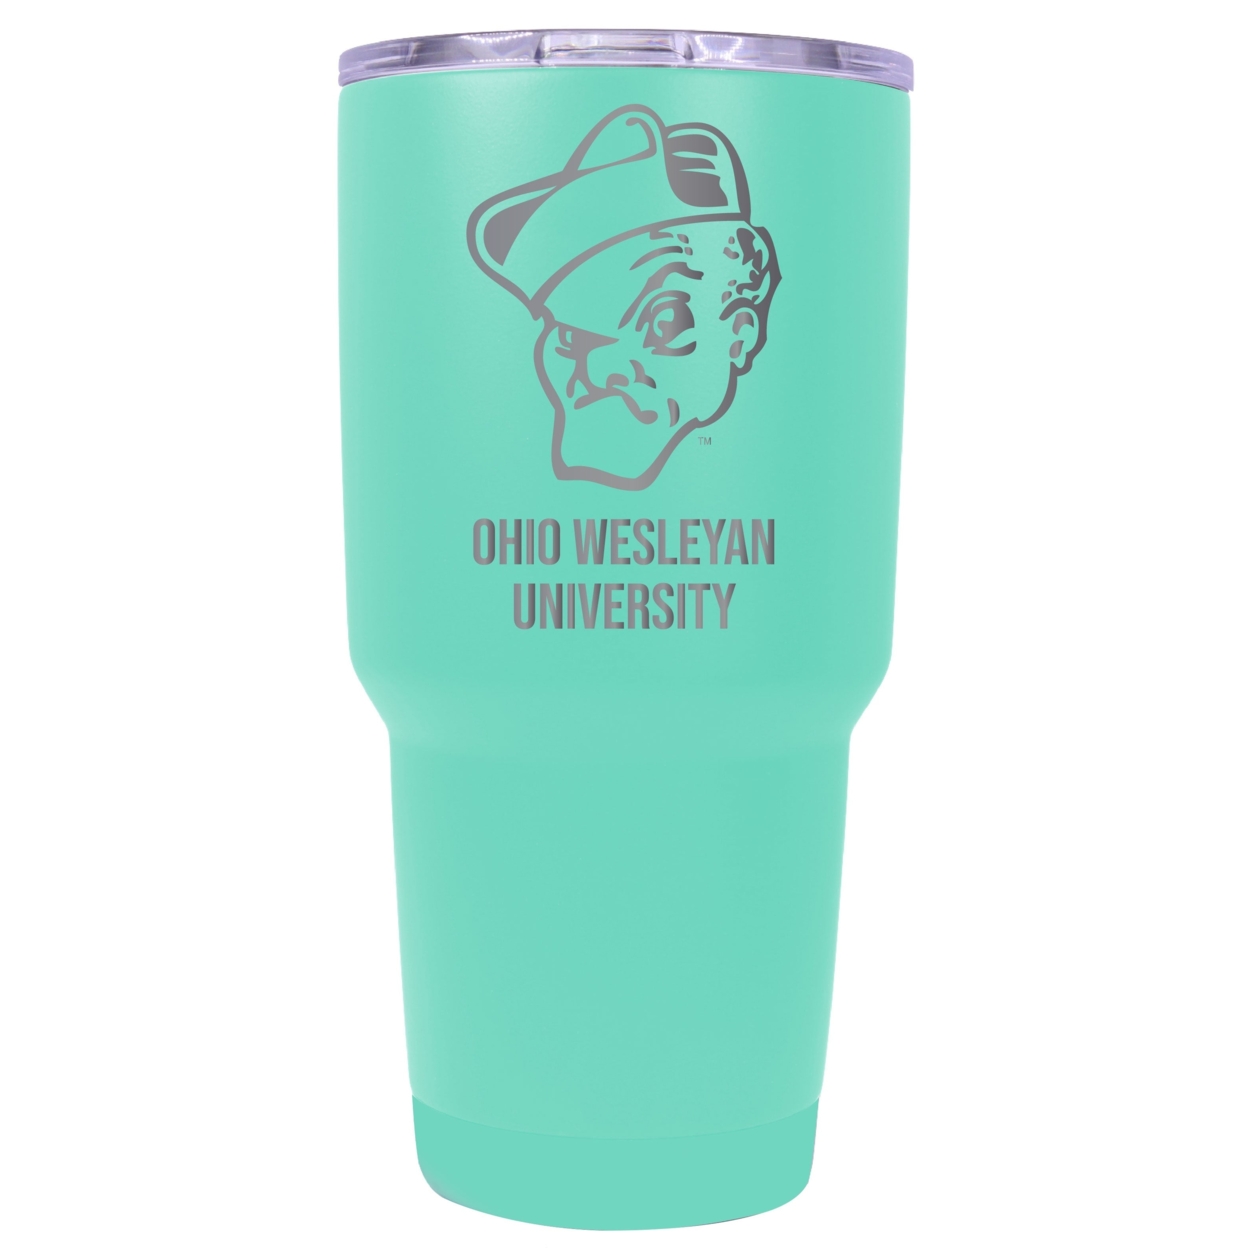 Ohio Wesleyan University 24 Oz Laser Engraved Stainless Steel Insulated Tumbler - Choose Your Color. - Coral